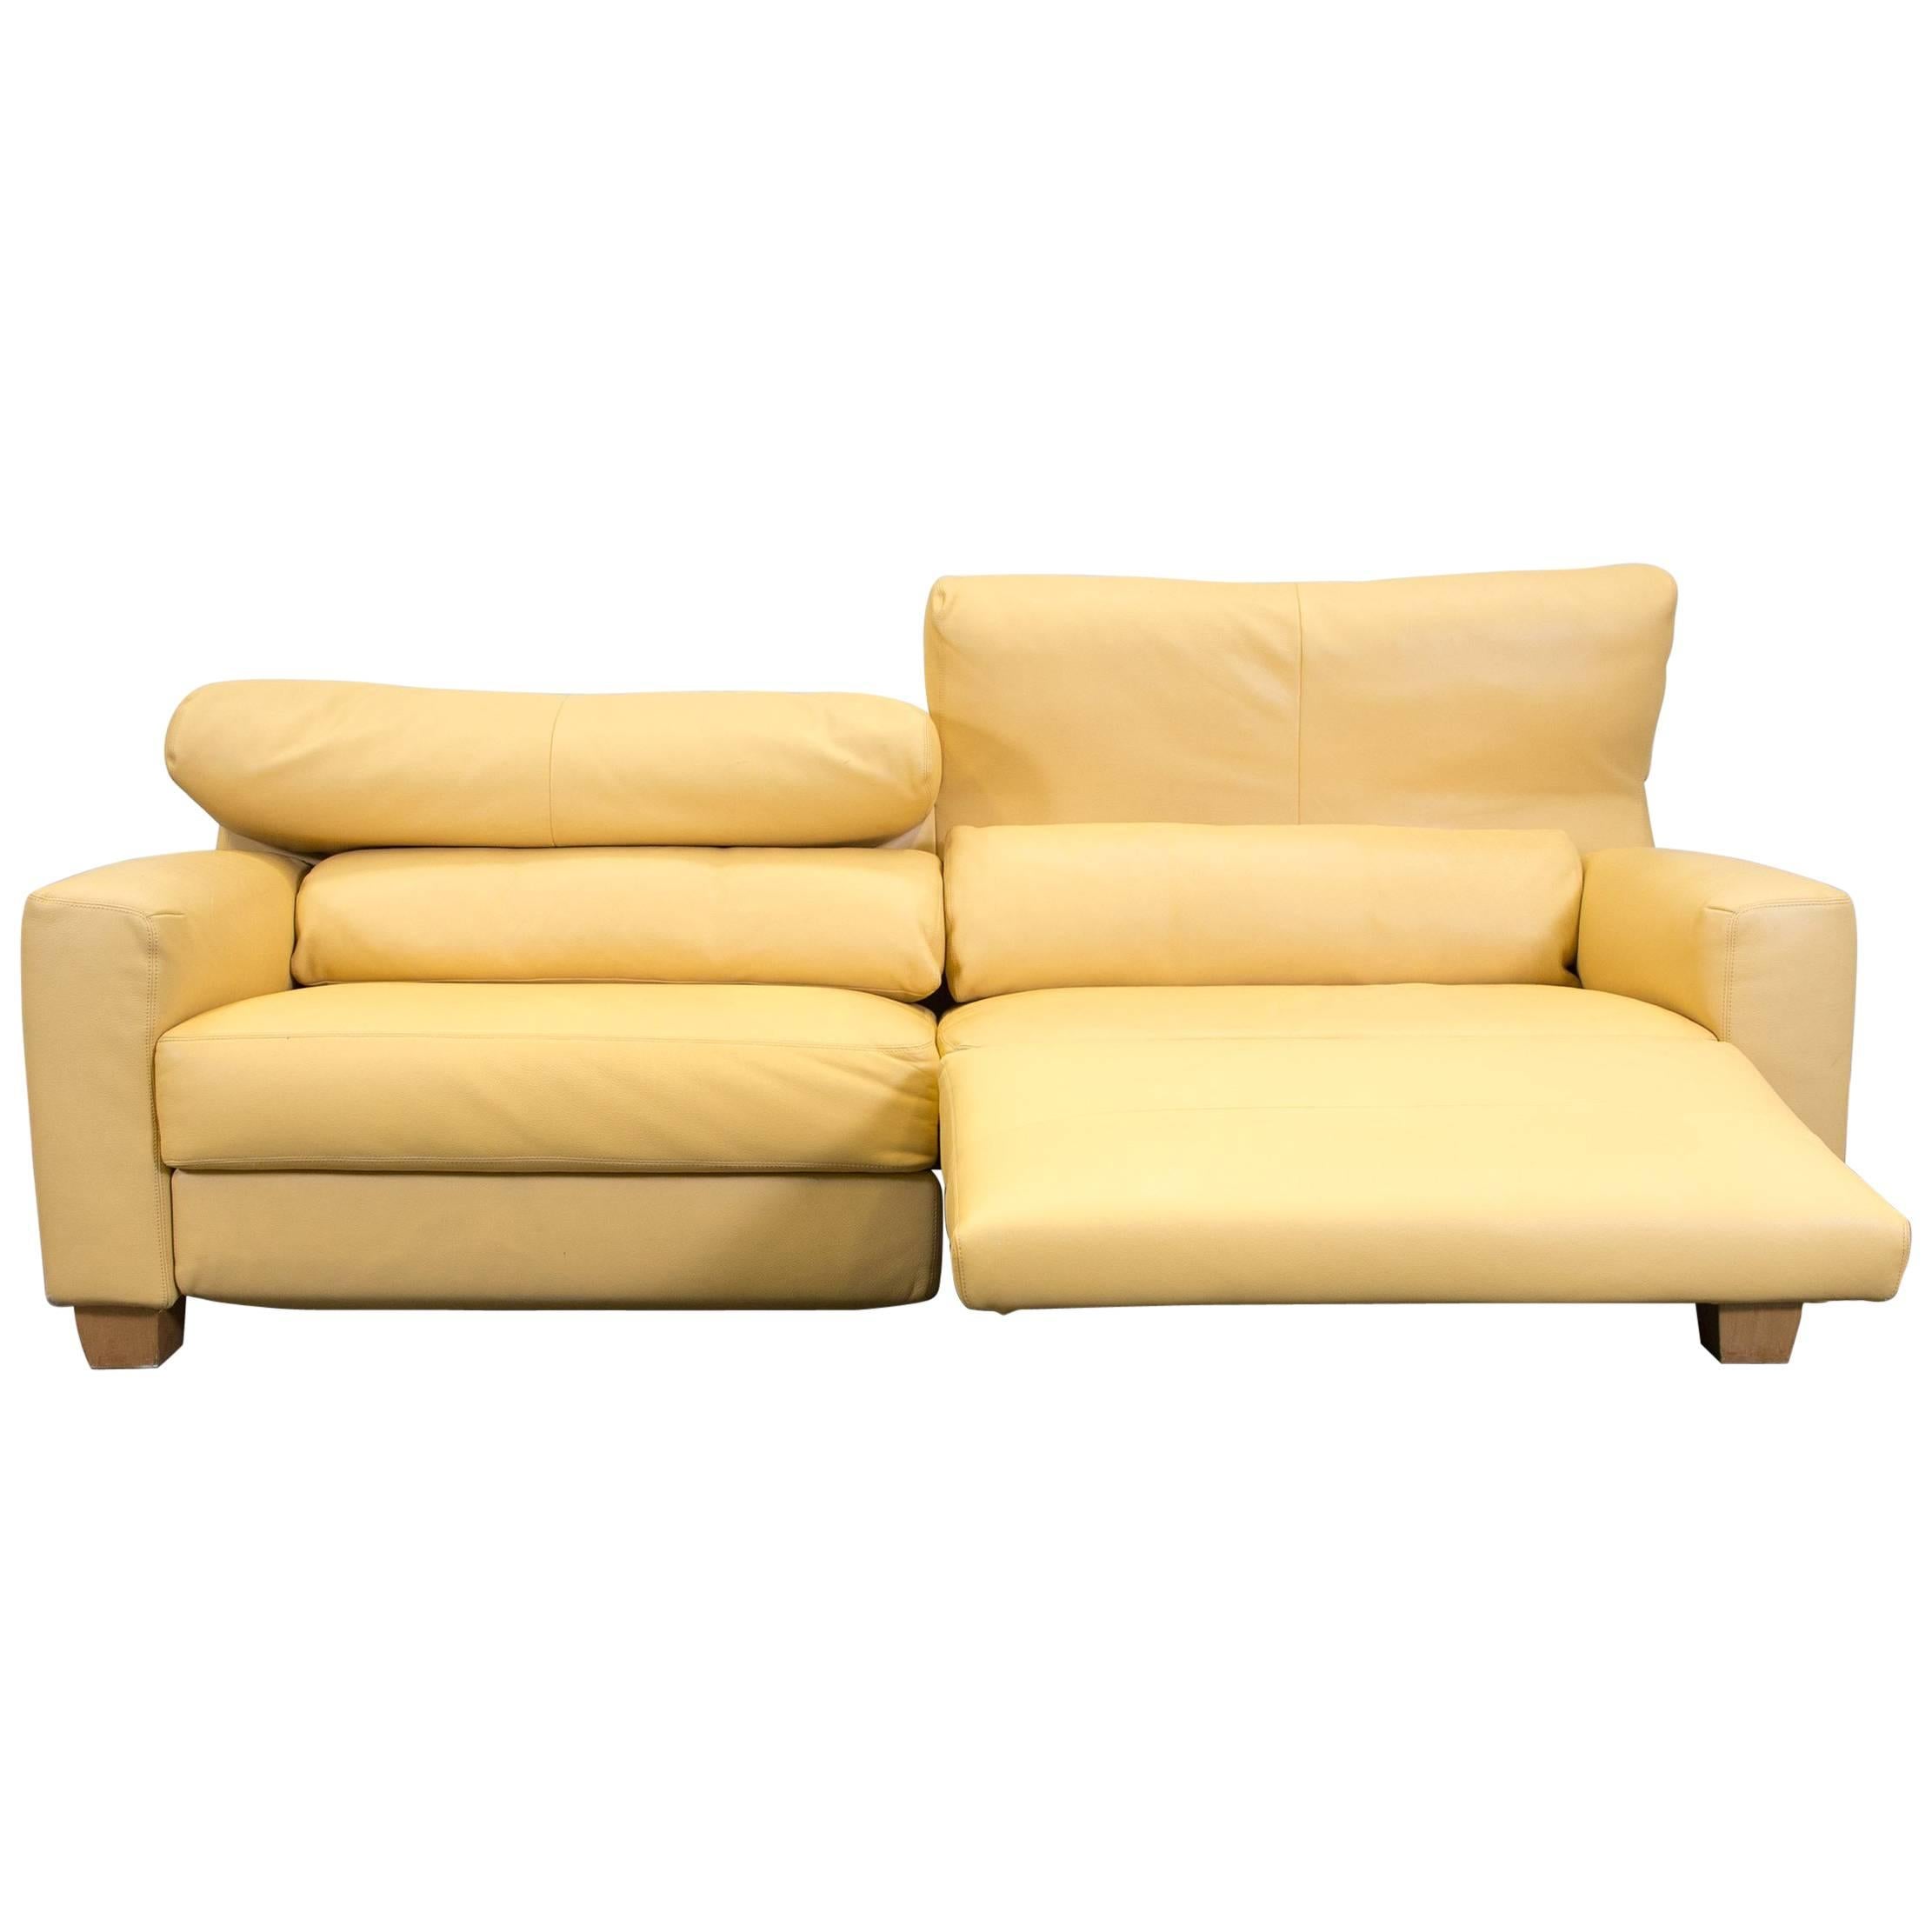 FSM Leather Couch Relax Function Three-Seat Sofa Yellow Orange